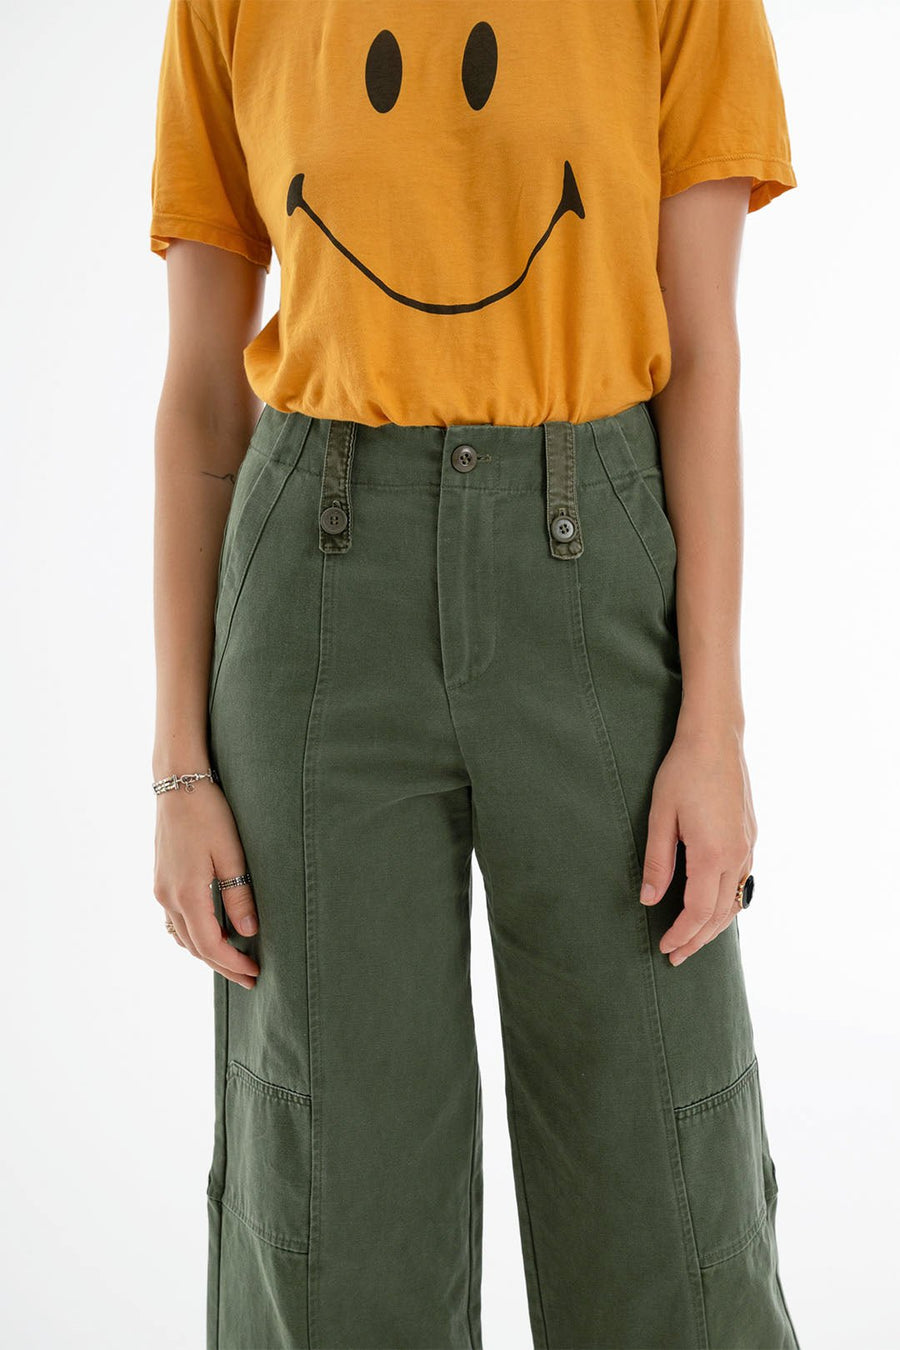 LOVE NOT WAR LONG PANT, ARMY - Burning Torch Online Boutique